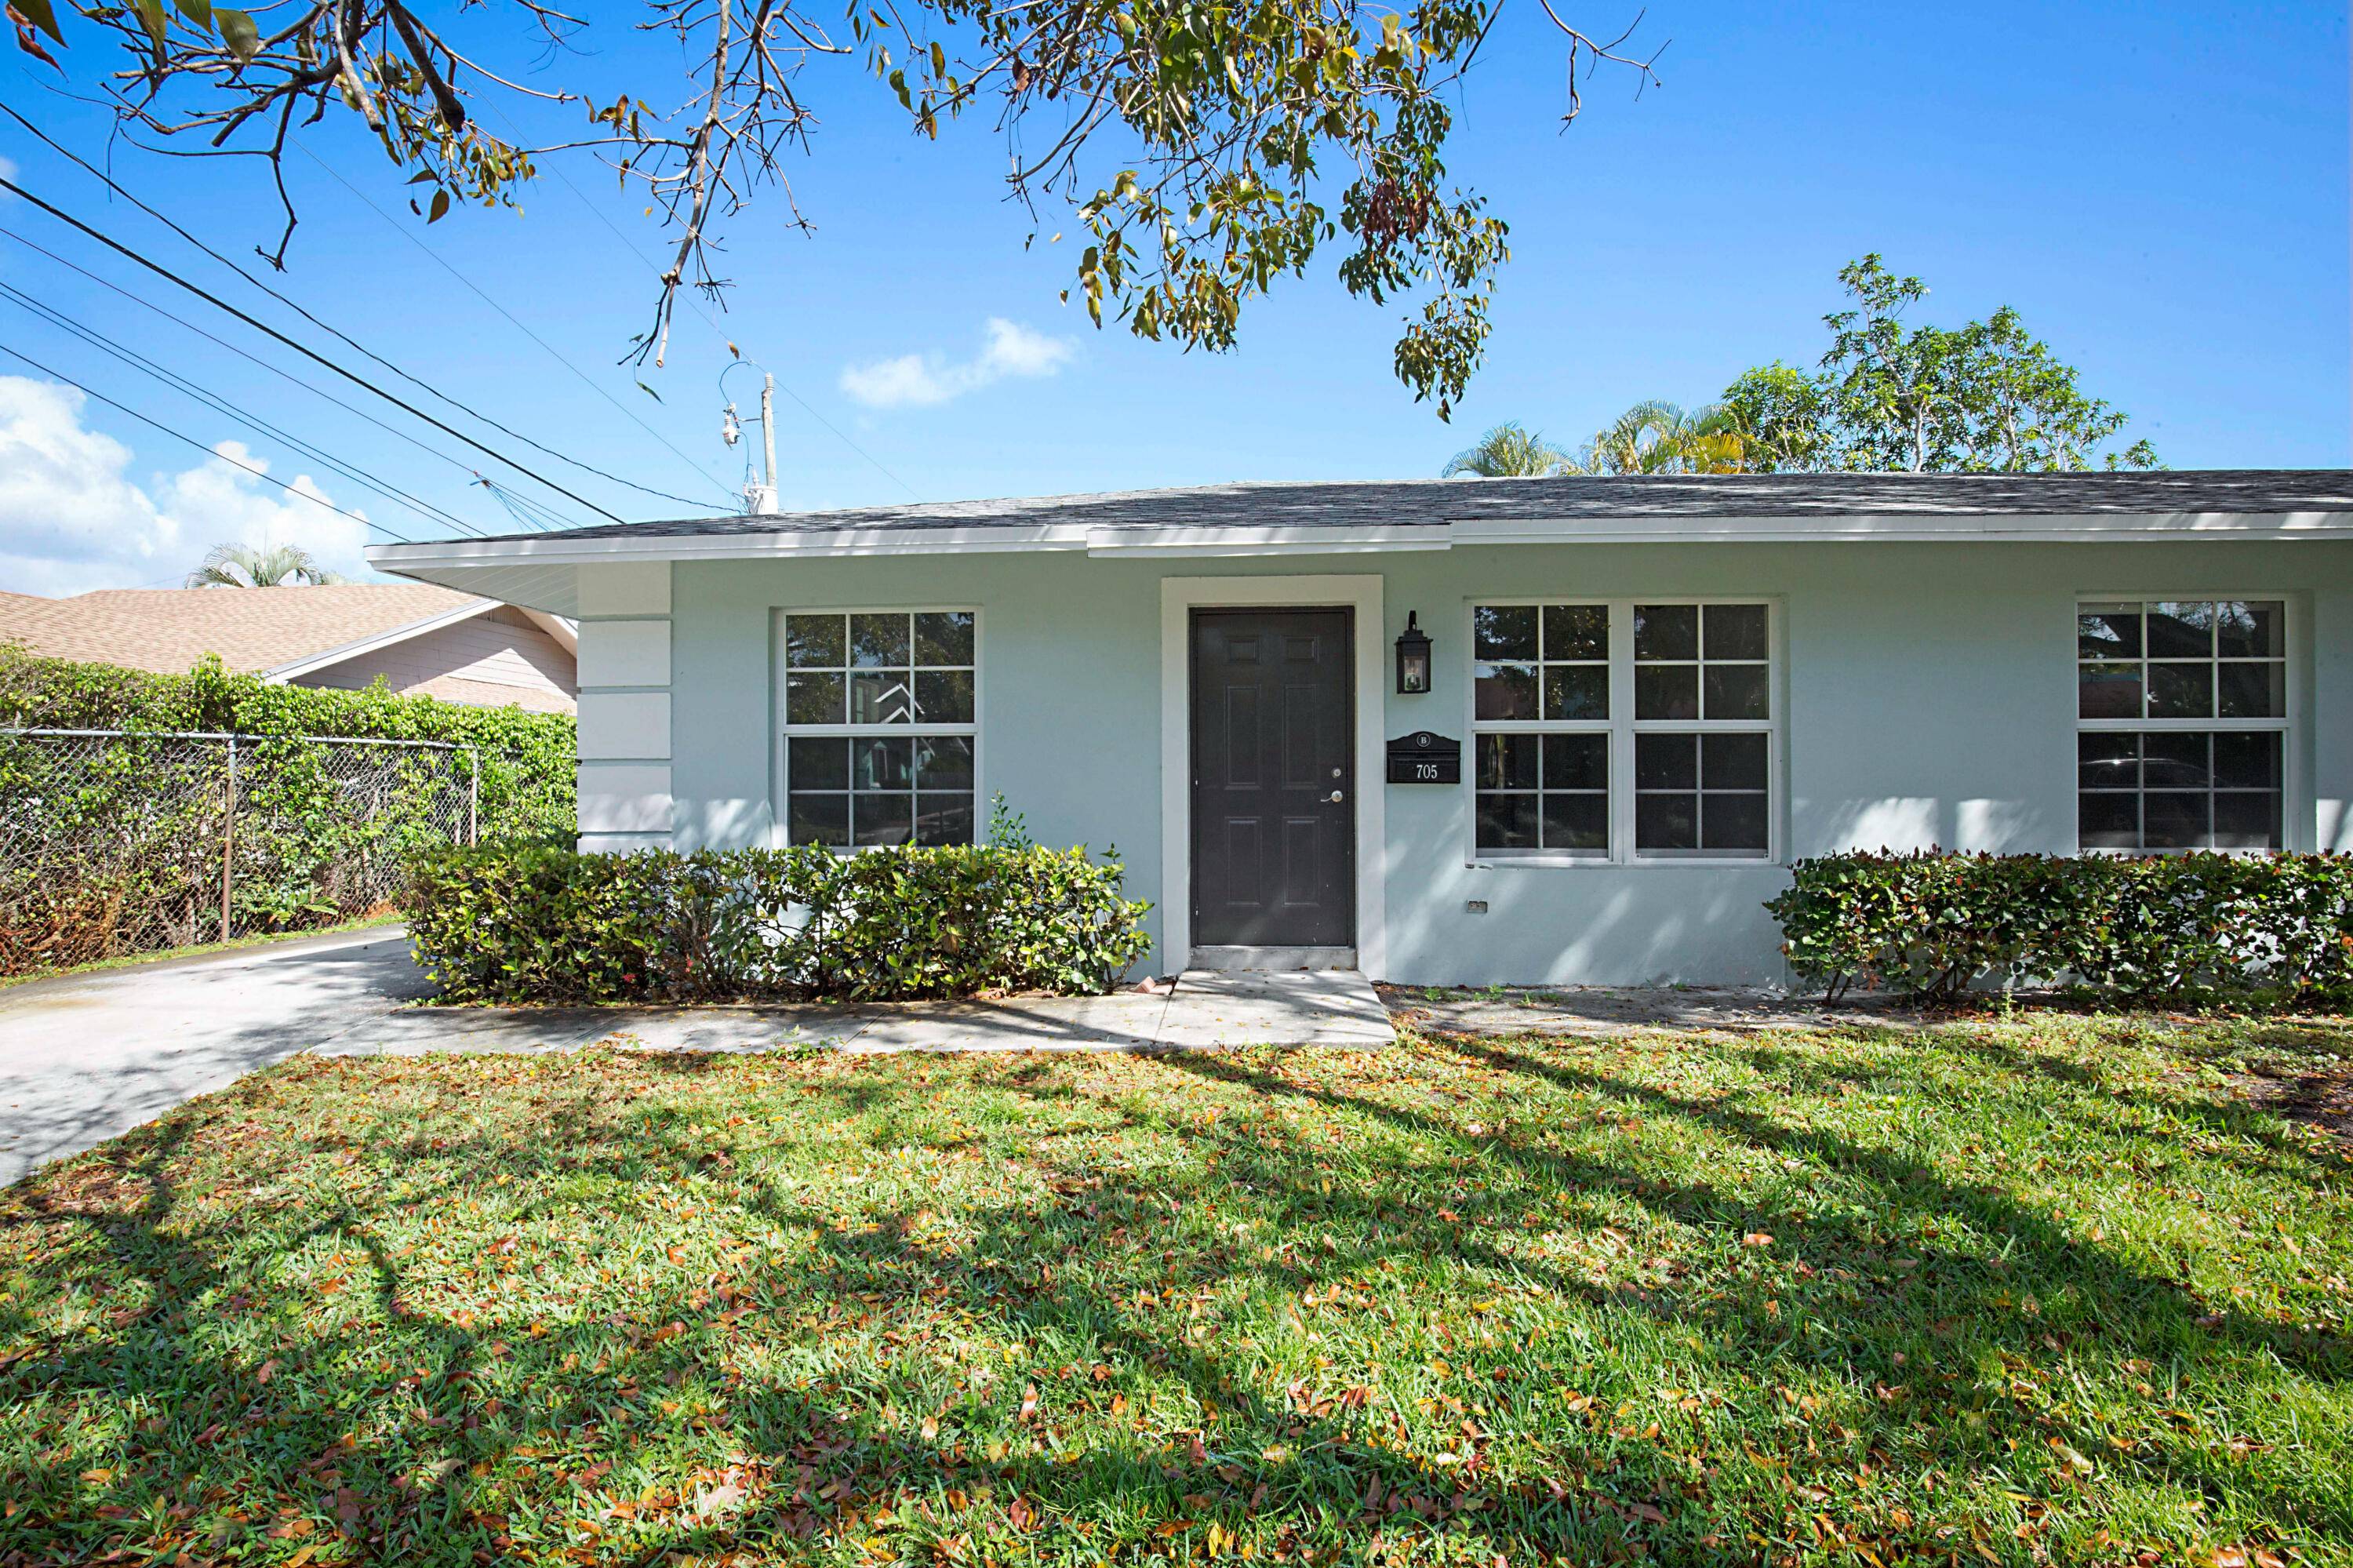 Rarely available, immaculate 2bedroom 2bath duplex in the coveted Grandview Heights neighborhood in Downtown WPB.